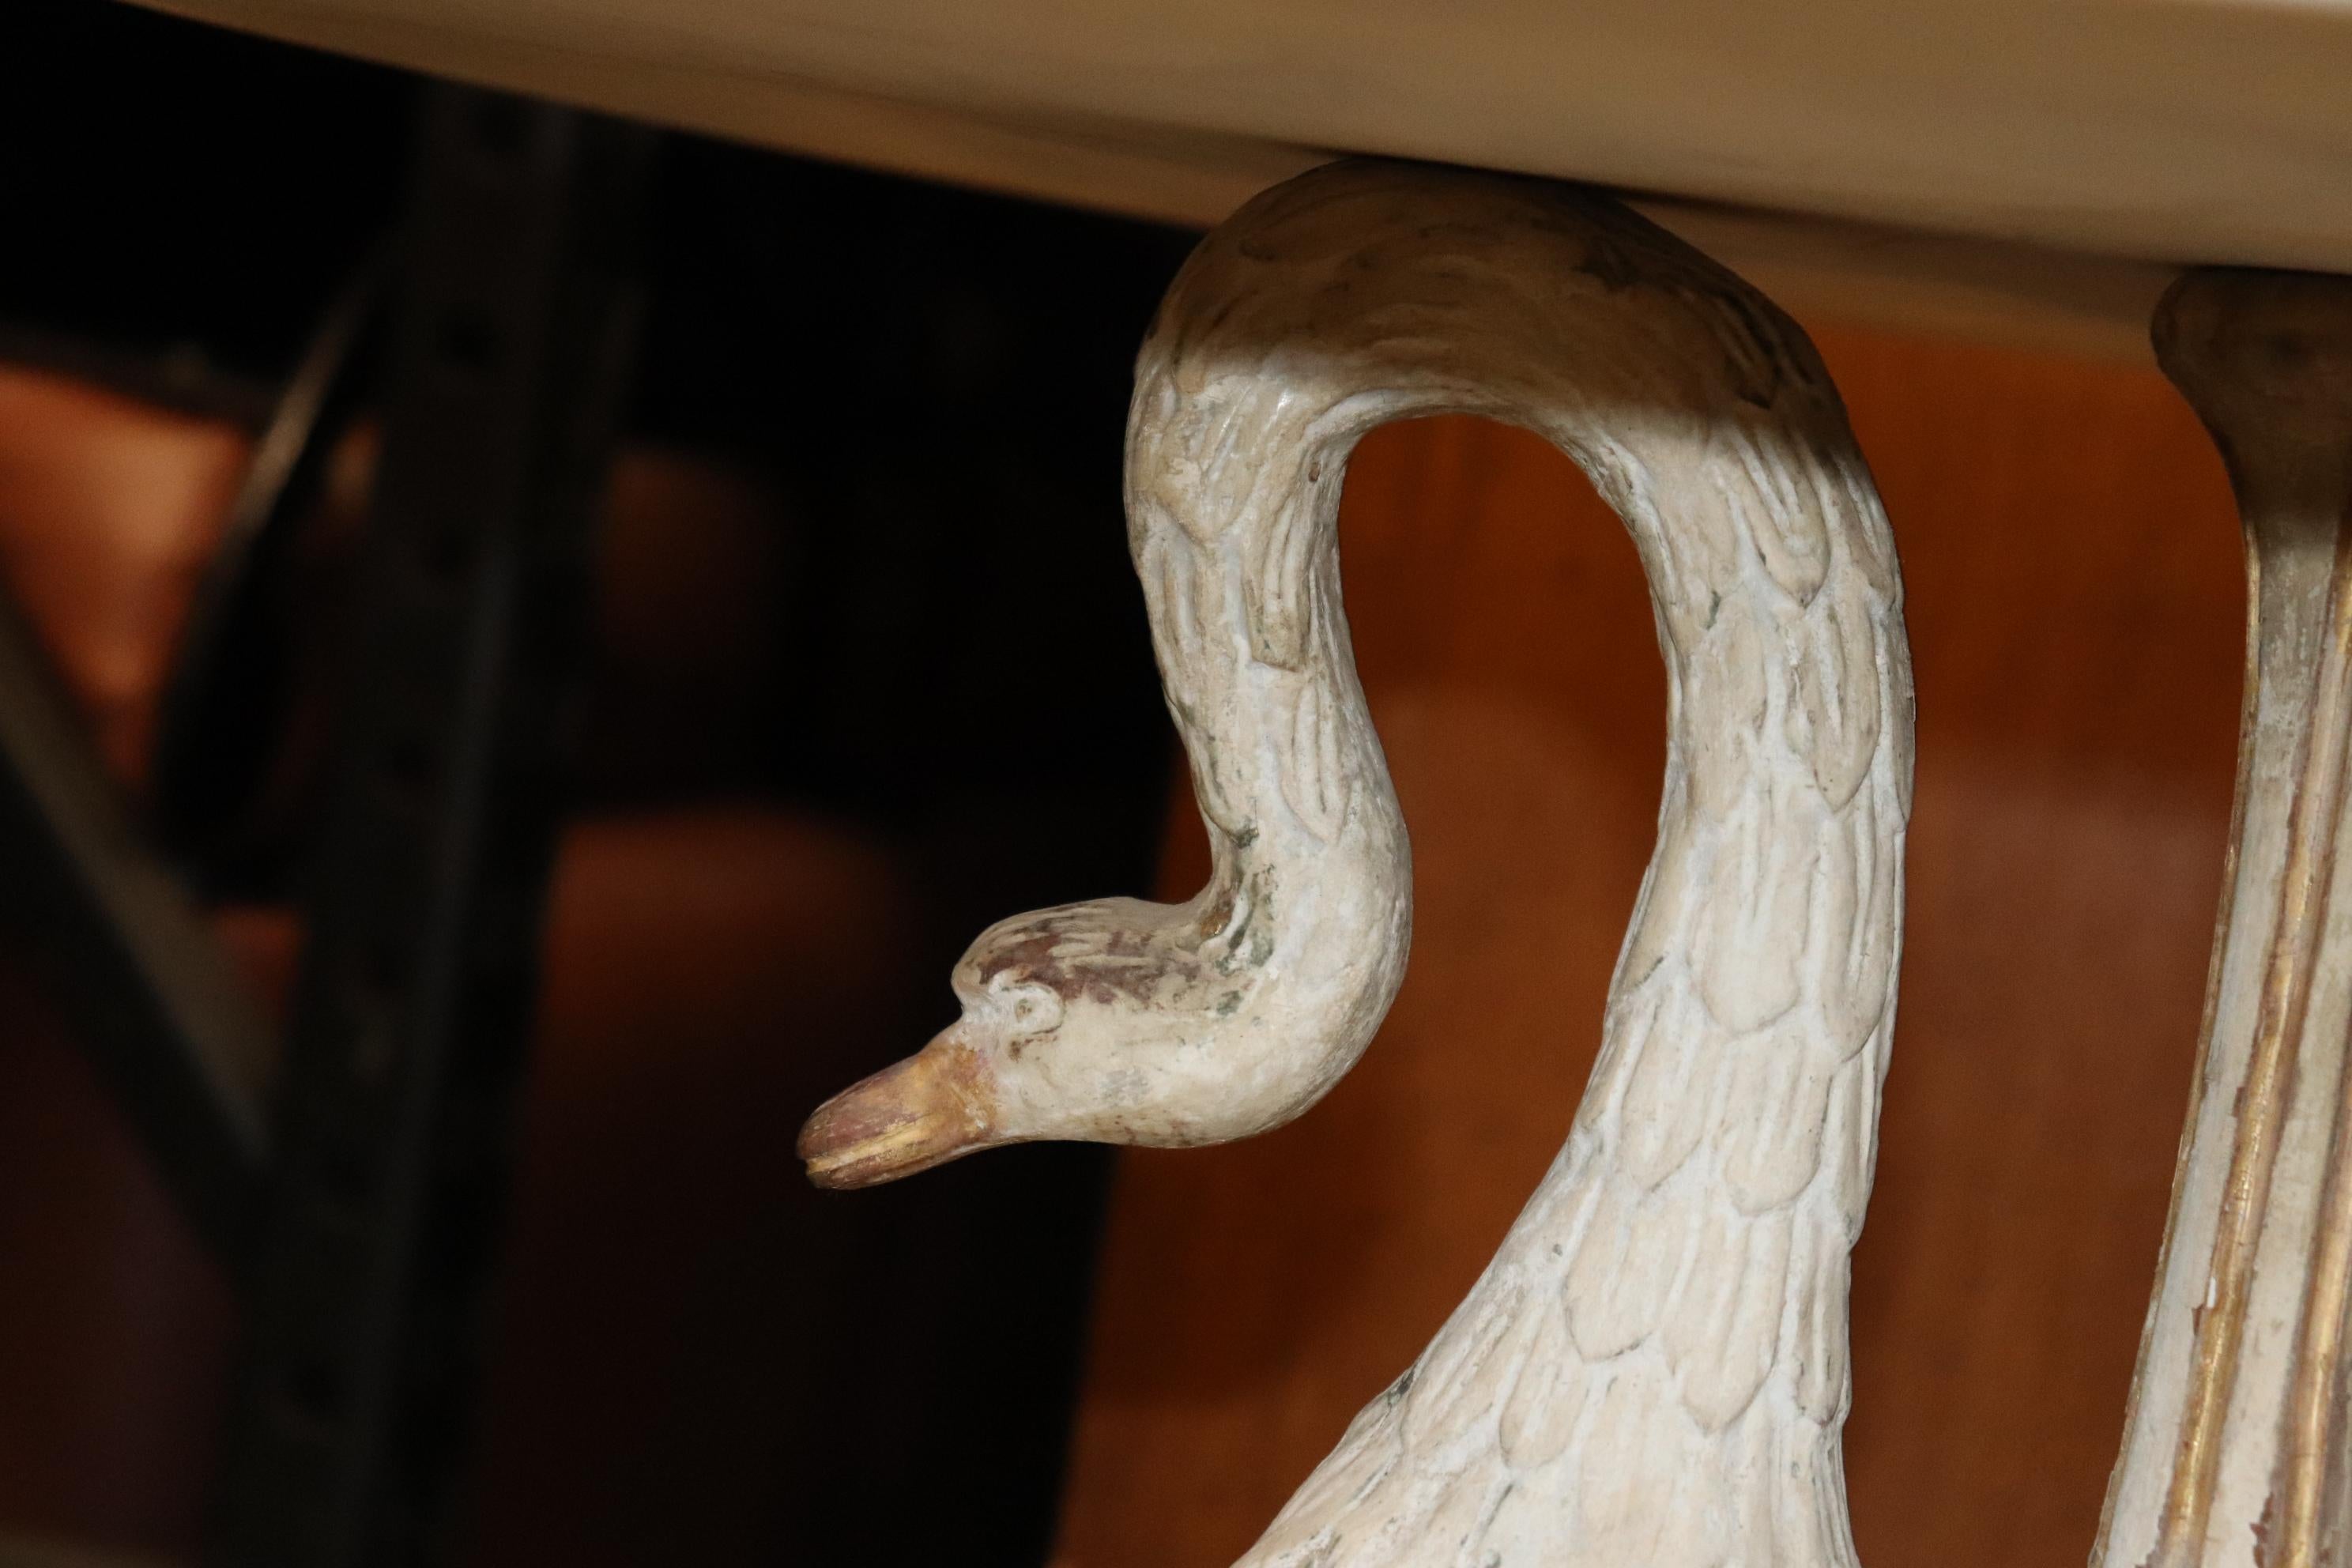 This is a superbly carved full-bodied set of 3 swans all painted and done in realistic fashion. The swans are surmounted by a marble top that is fitted with a brass decorative top. The table measures 24 x 24 x 24 and is a very rare and unique and